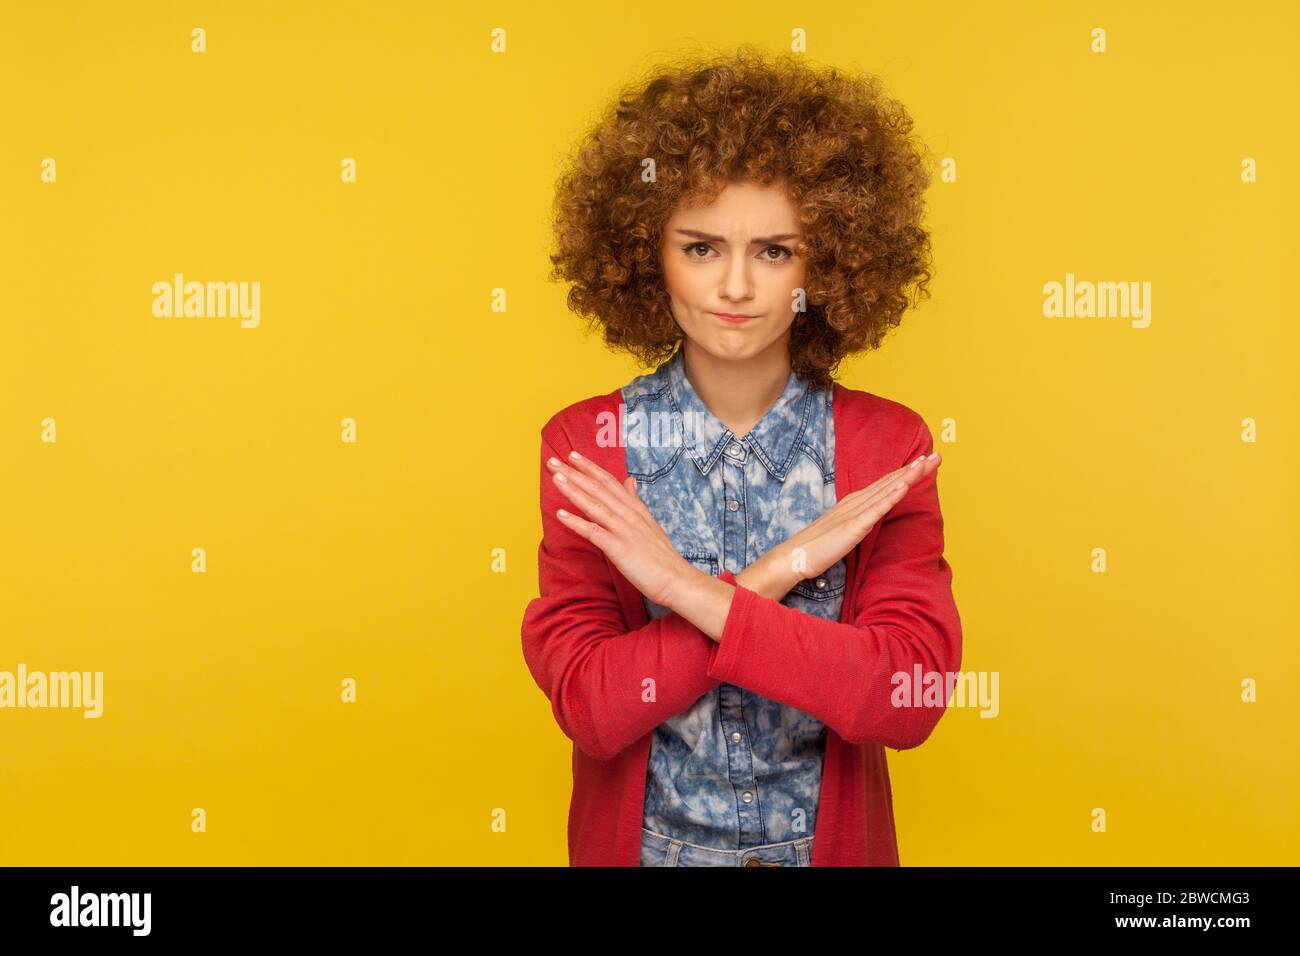 Stop, banned access. Portrait of young curly-haired woman crossing hands, warning with x sign, rejecting troubles with definitive no, body language. i Stock Photo